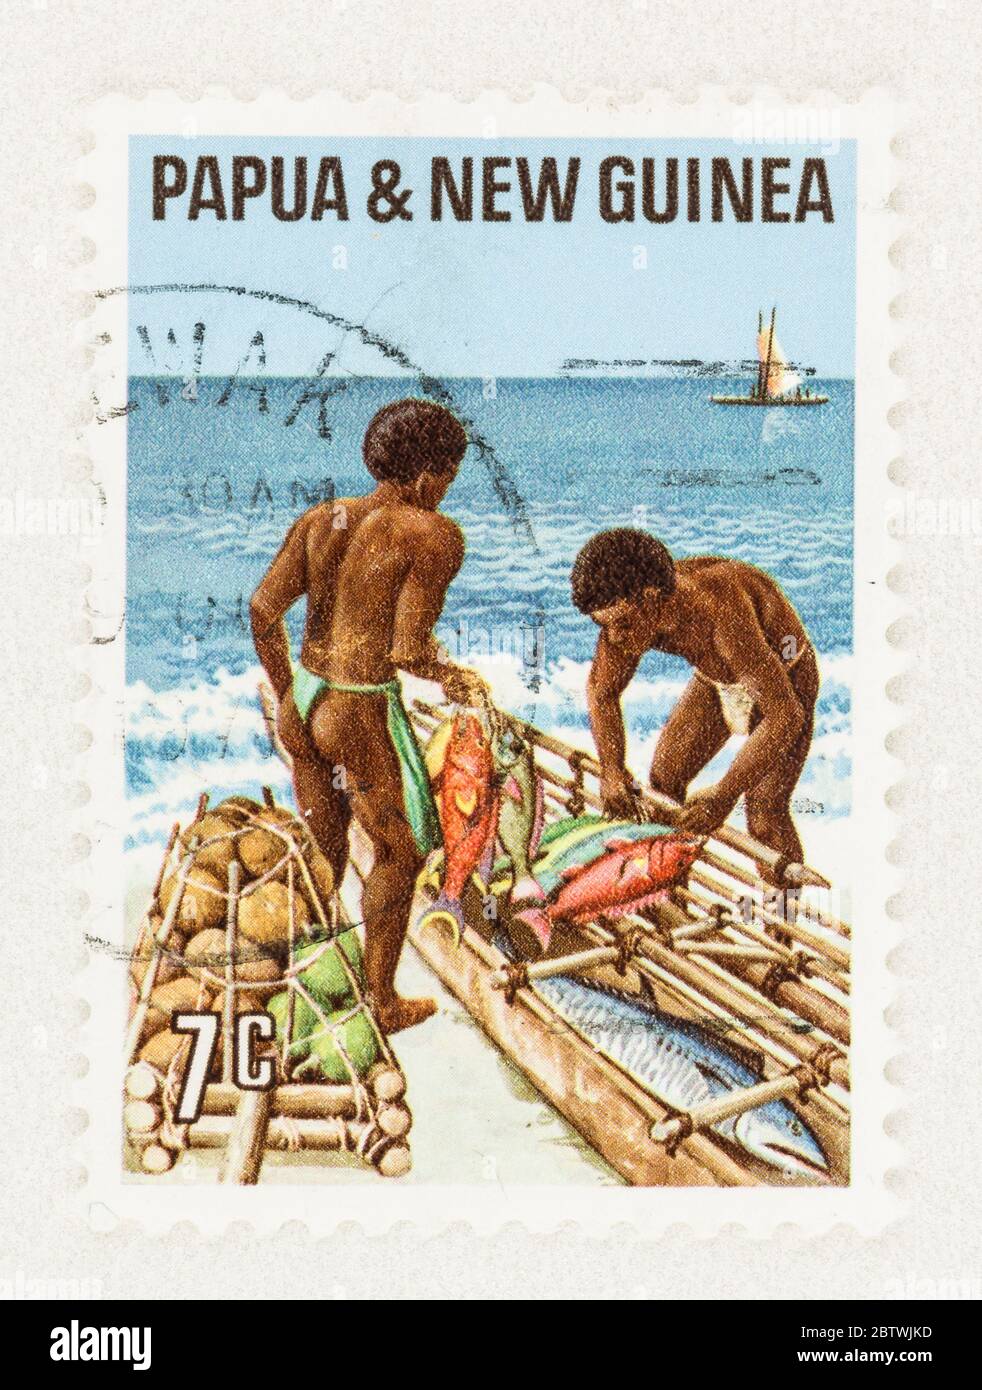 SEATTLE WASHINGTON - May 25, 2020:  Papua & New Guinea stamp featuring men on beach trading fish, coconuts and taro. Scott # 332 Stock Photo